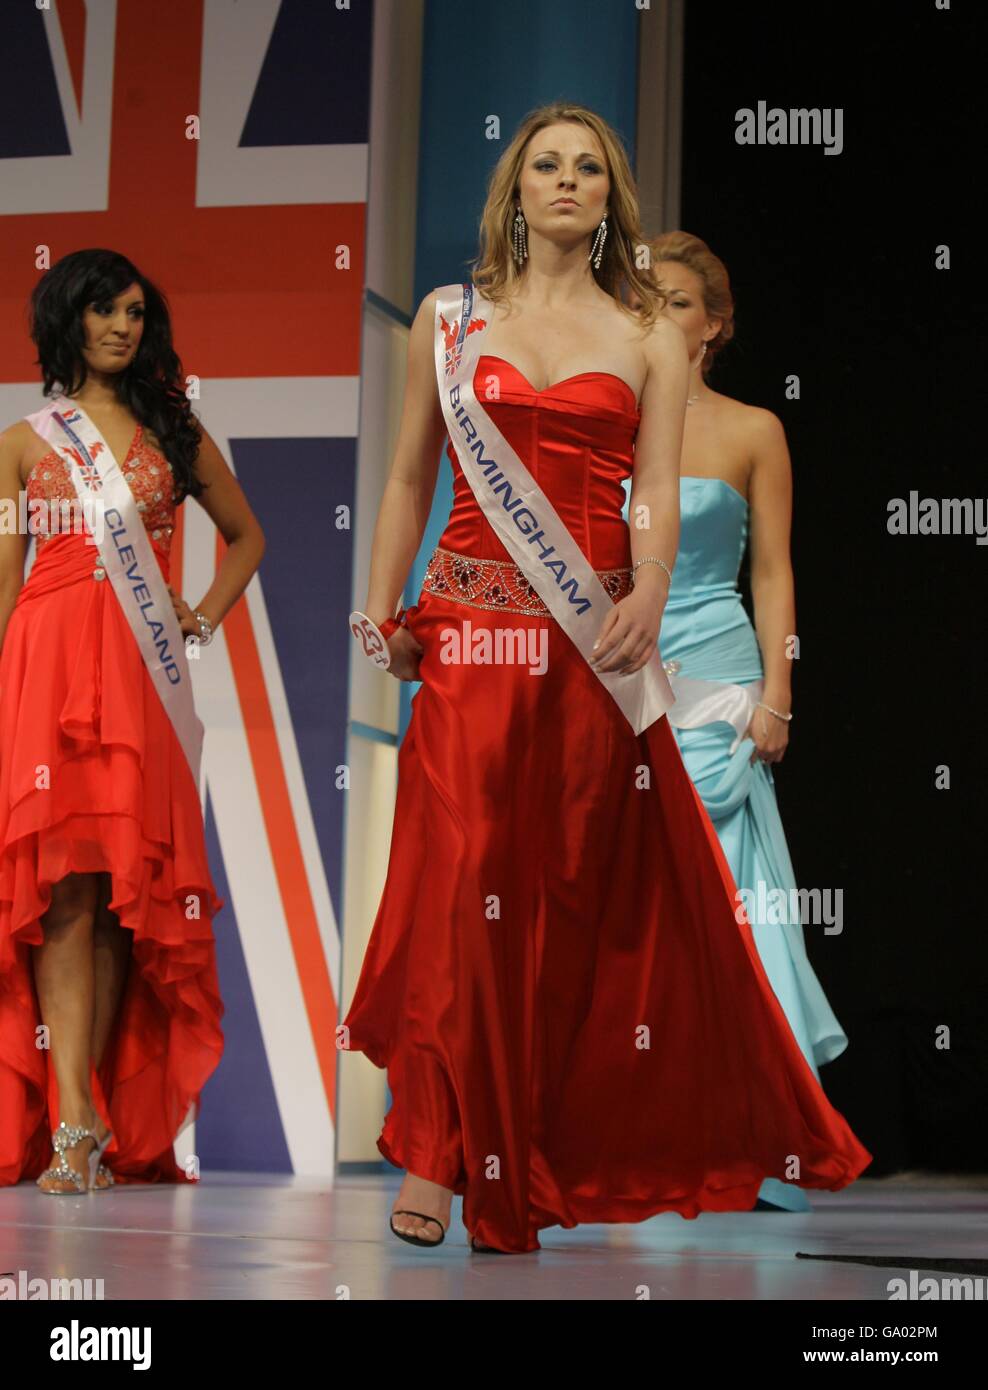 Sophie Wilson, Miss Birmingham, one of the contestants during the Grand Final of Miss Great Britain held at Grosvenor House hotel in central London. Stock Photo